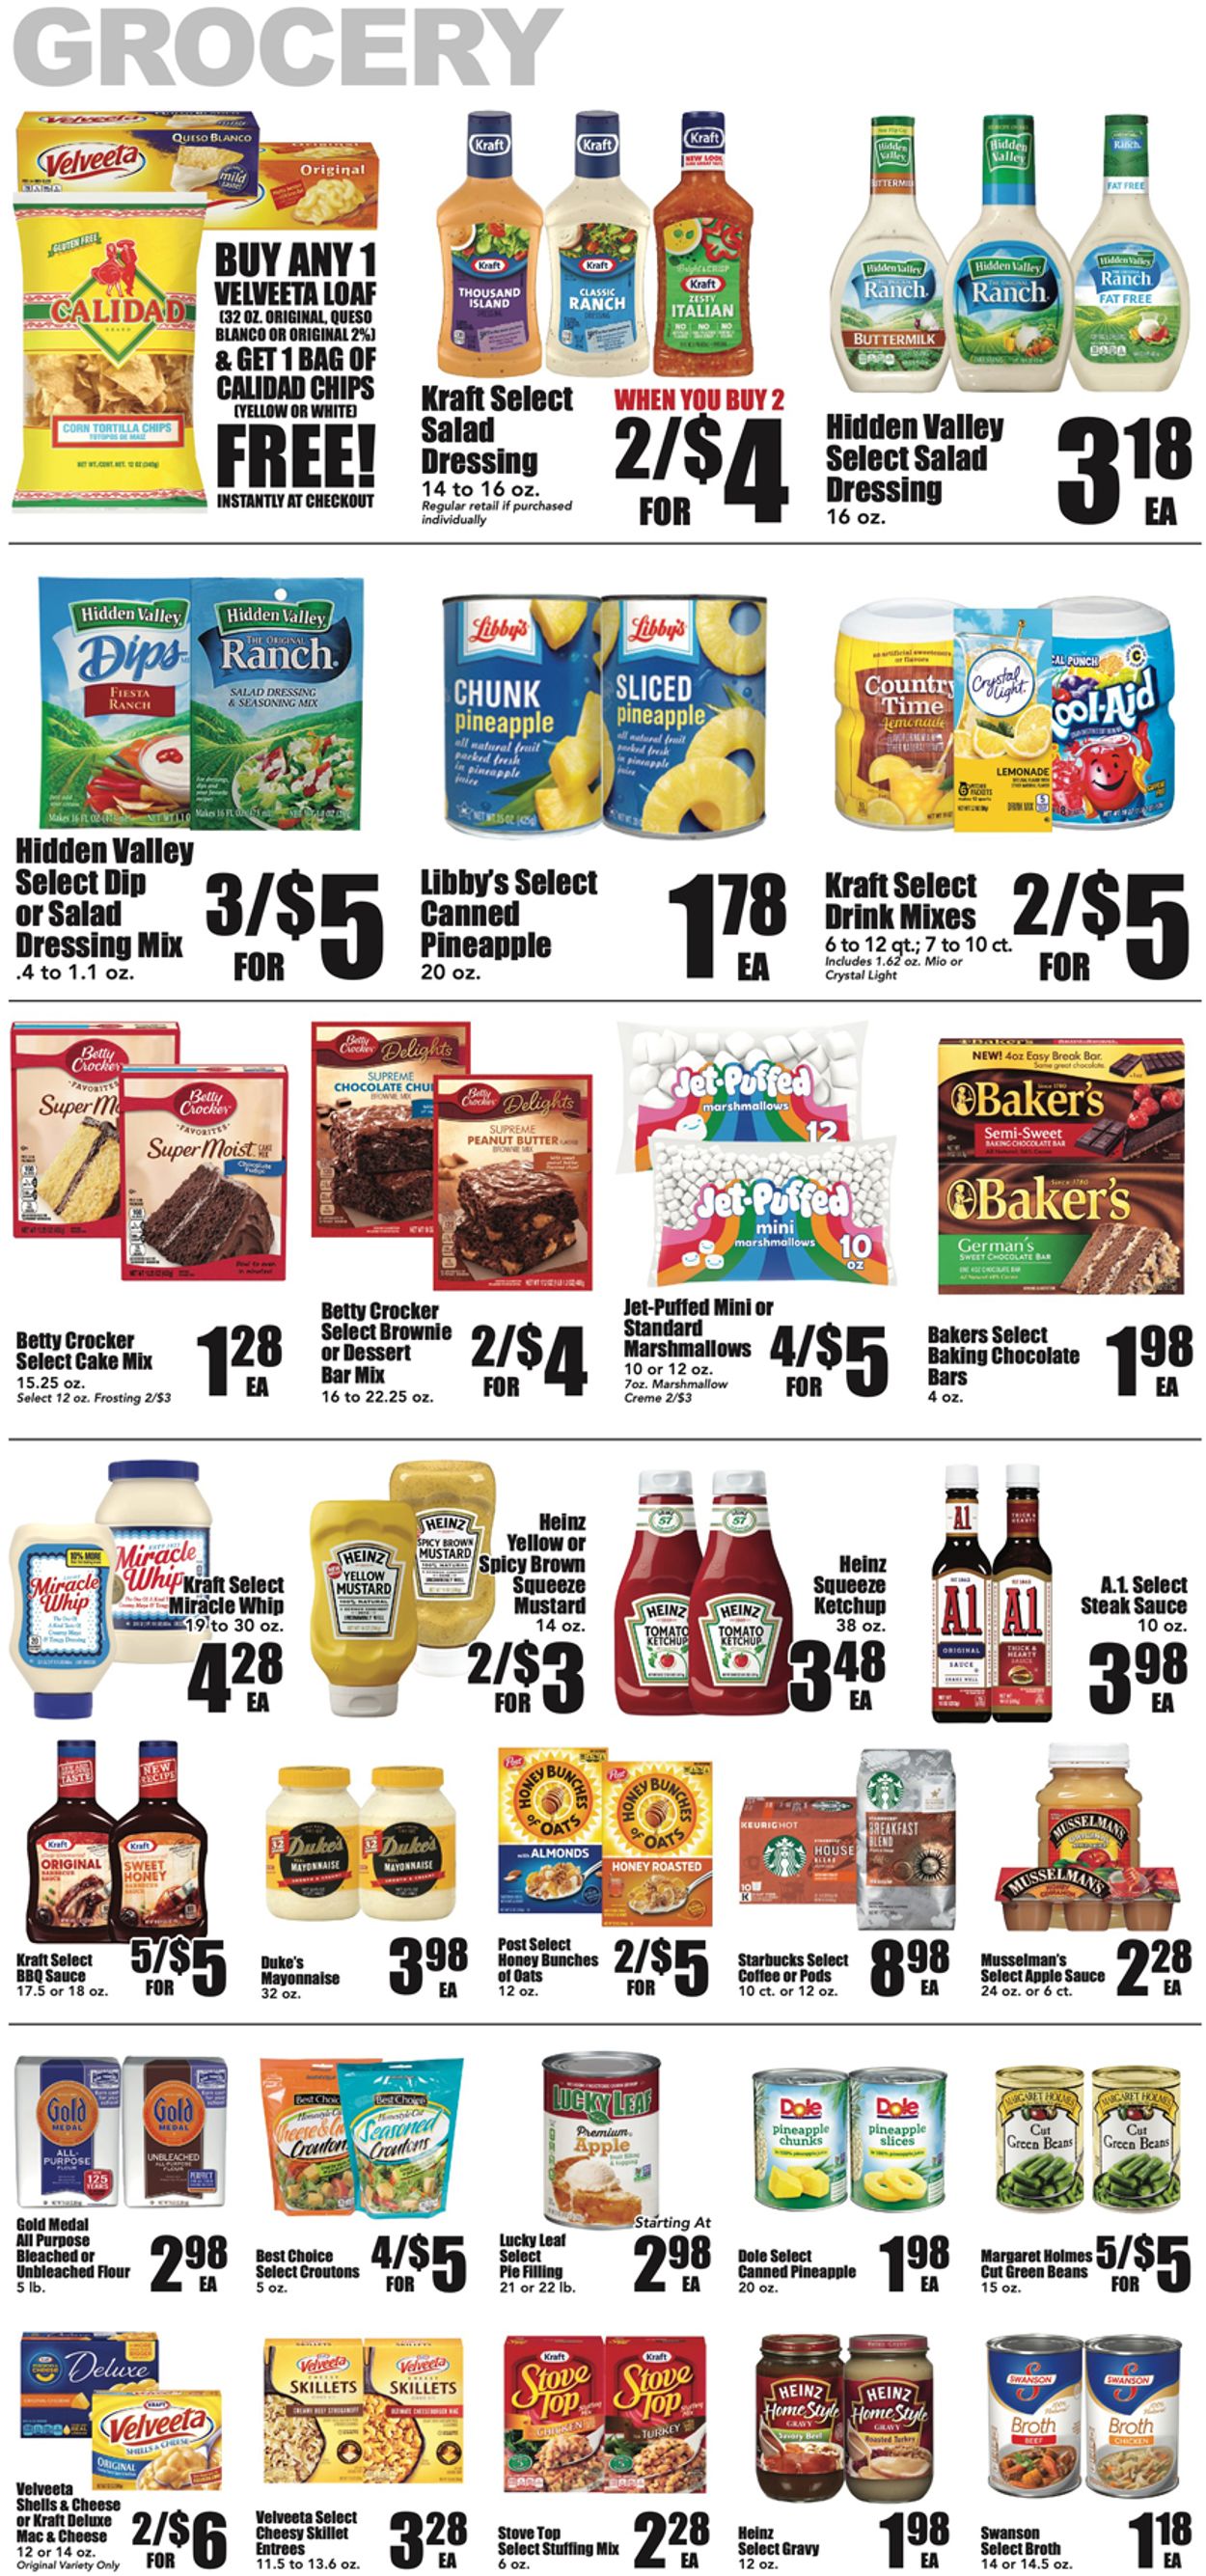 Warehouse Market Ad from 04/13/2022